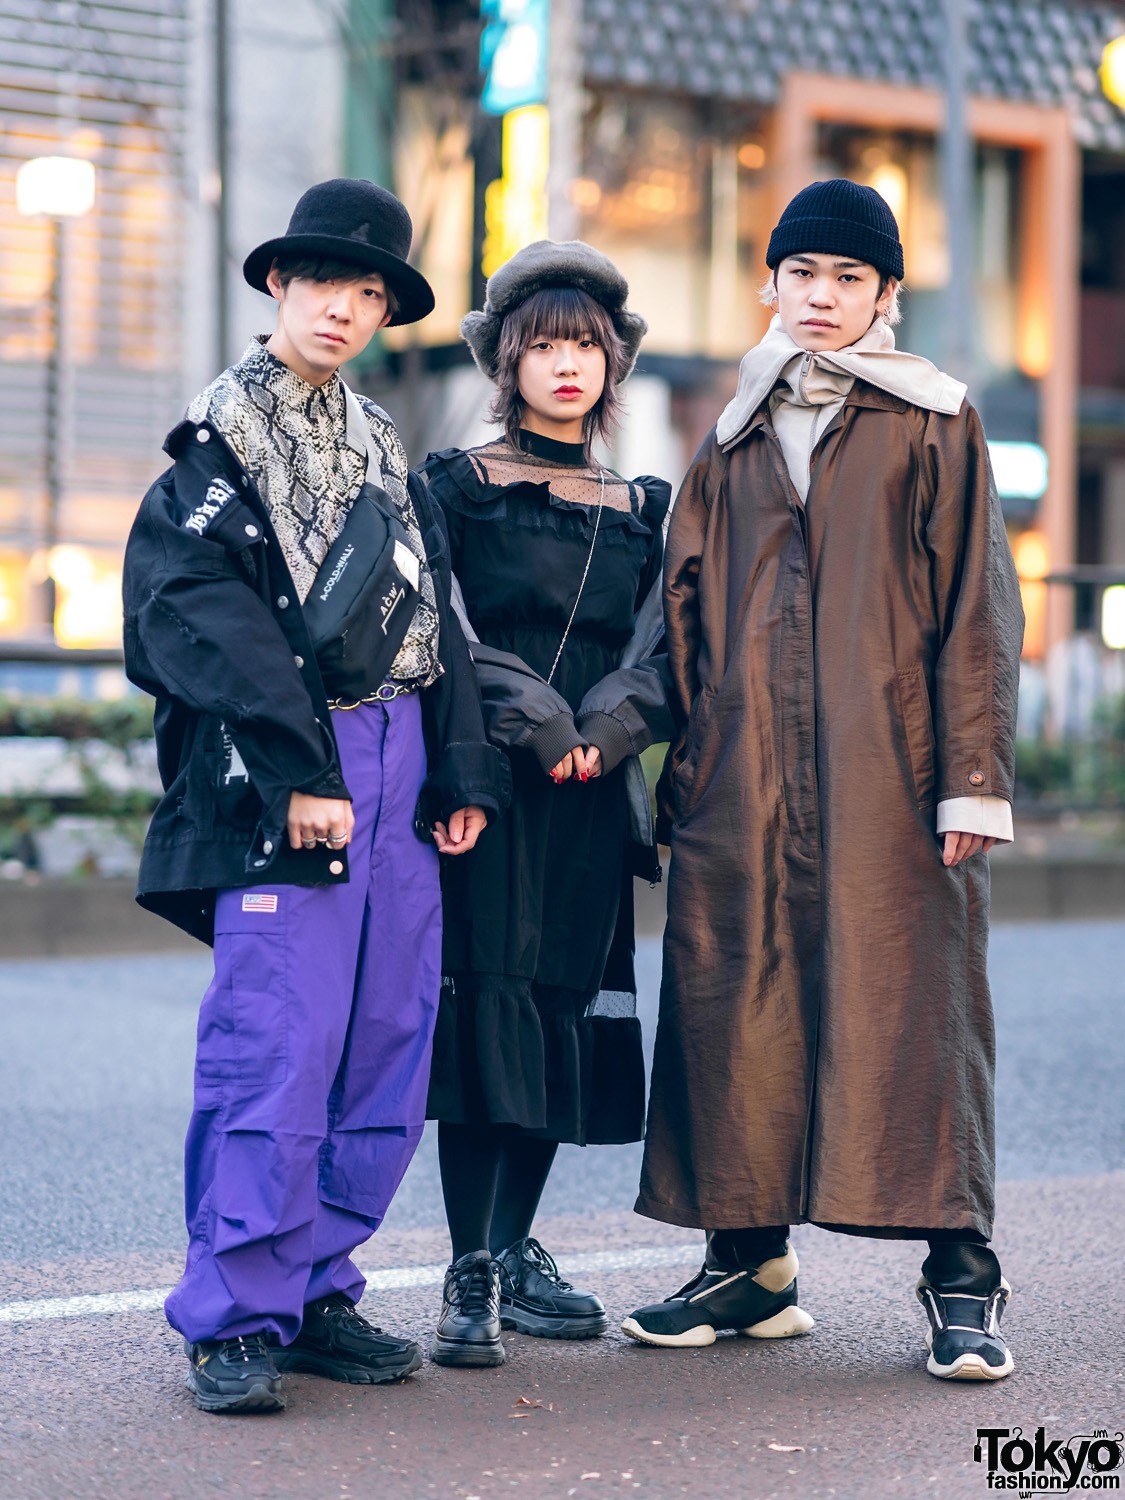 Japanese Streetwear Styles w/ MISBHV, H&M, UFO, A-Cold-Wall, Swankiss, Y's, COS, Chrome Hearts & Rick Owens